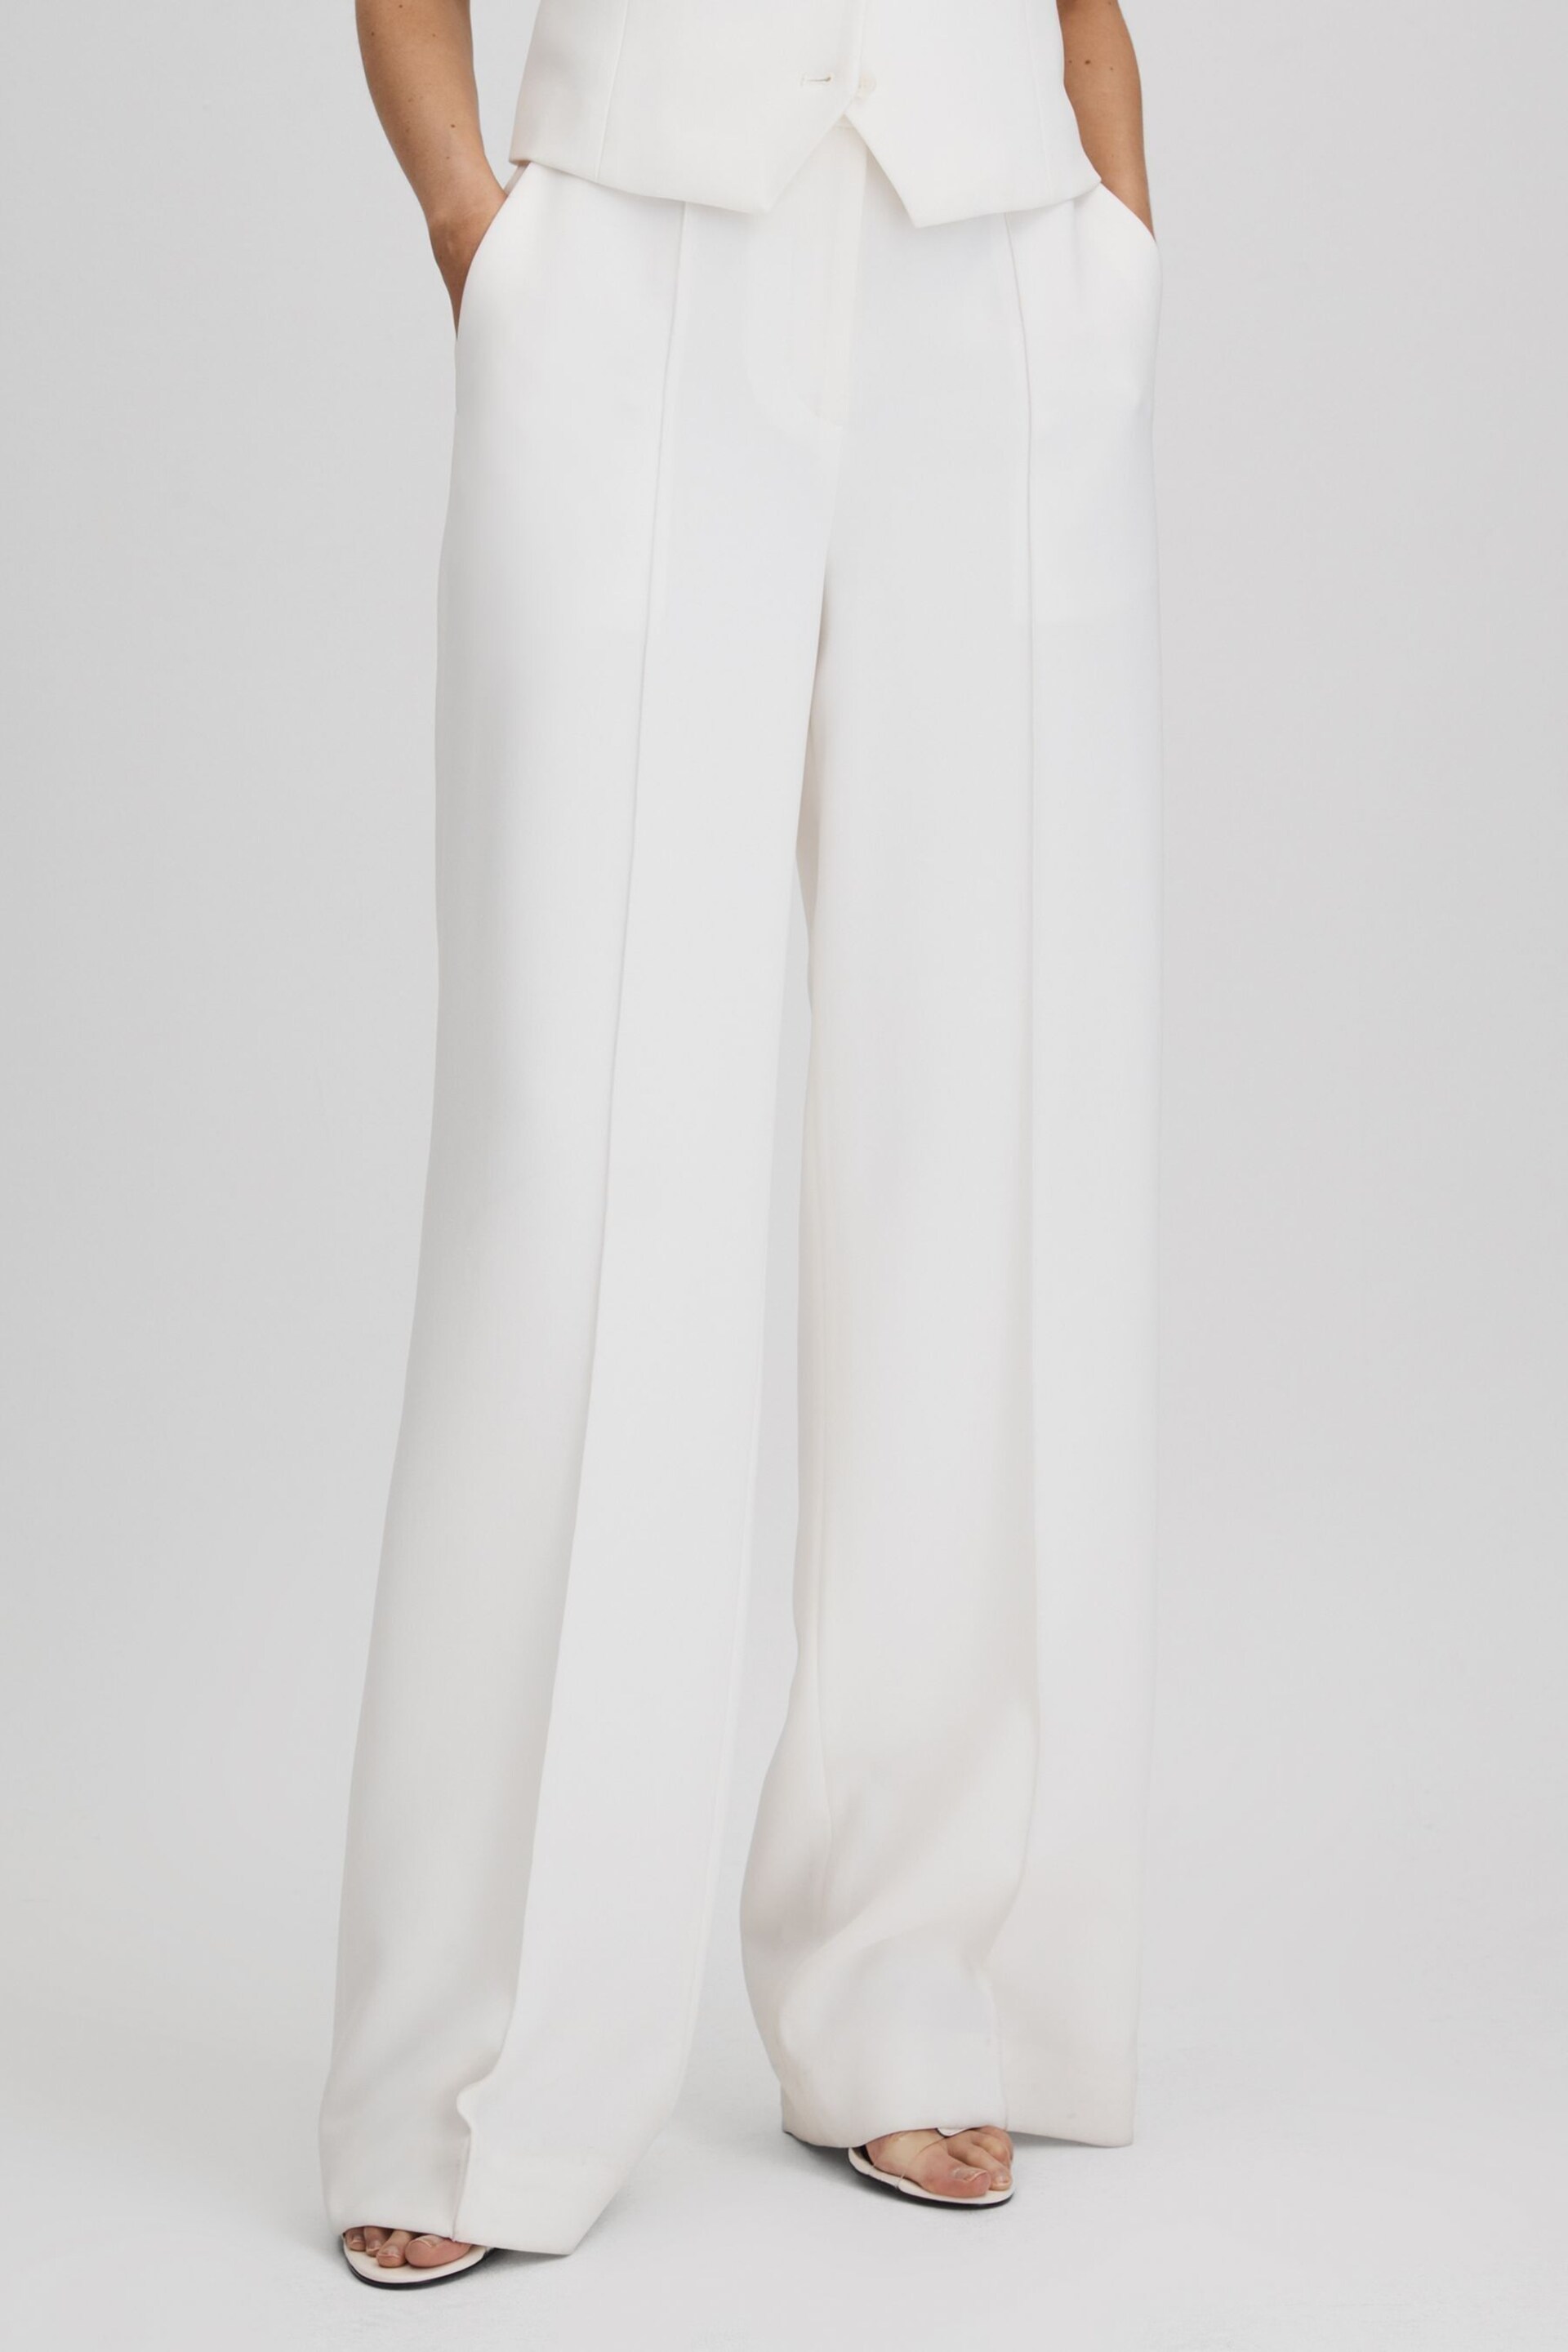 Reiss White Sienna Petite Crepe Wide Leg Suit Trousers - Image 1 of 8